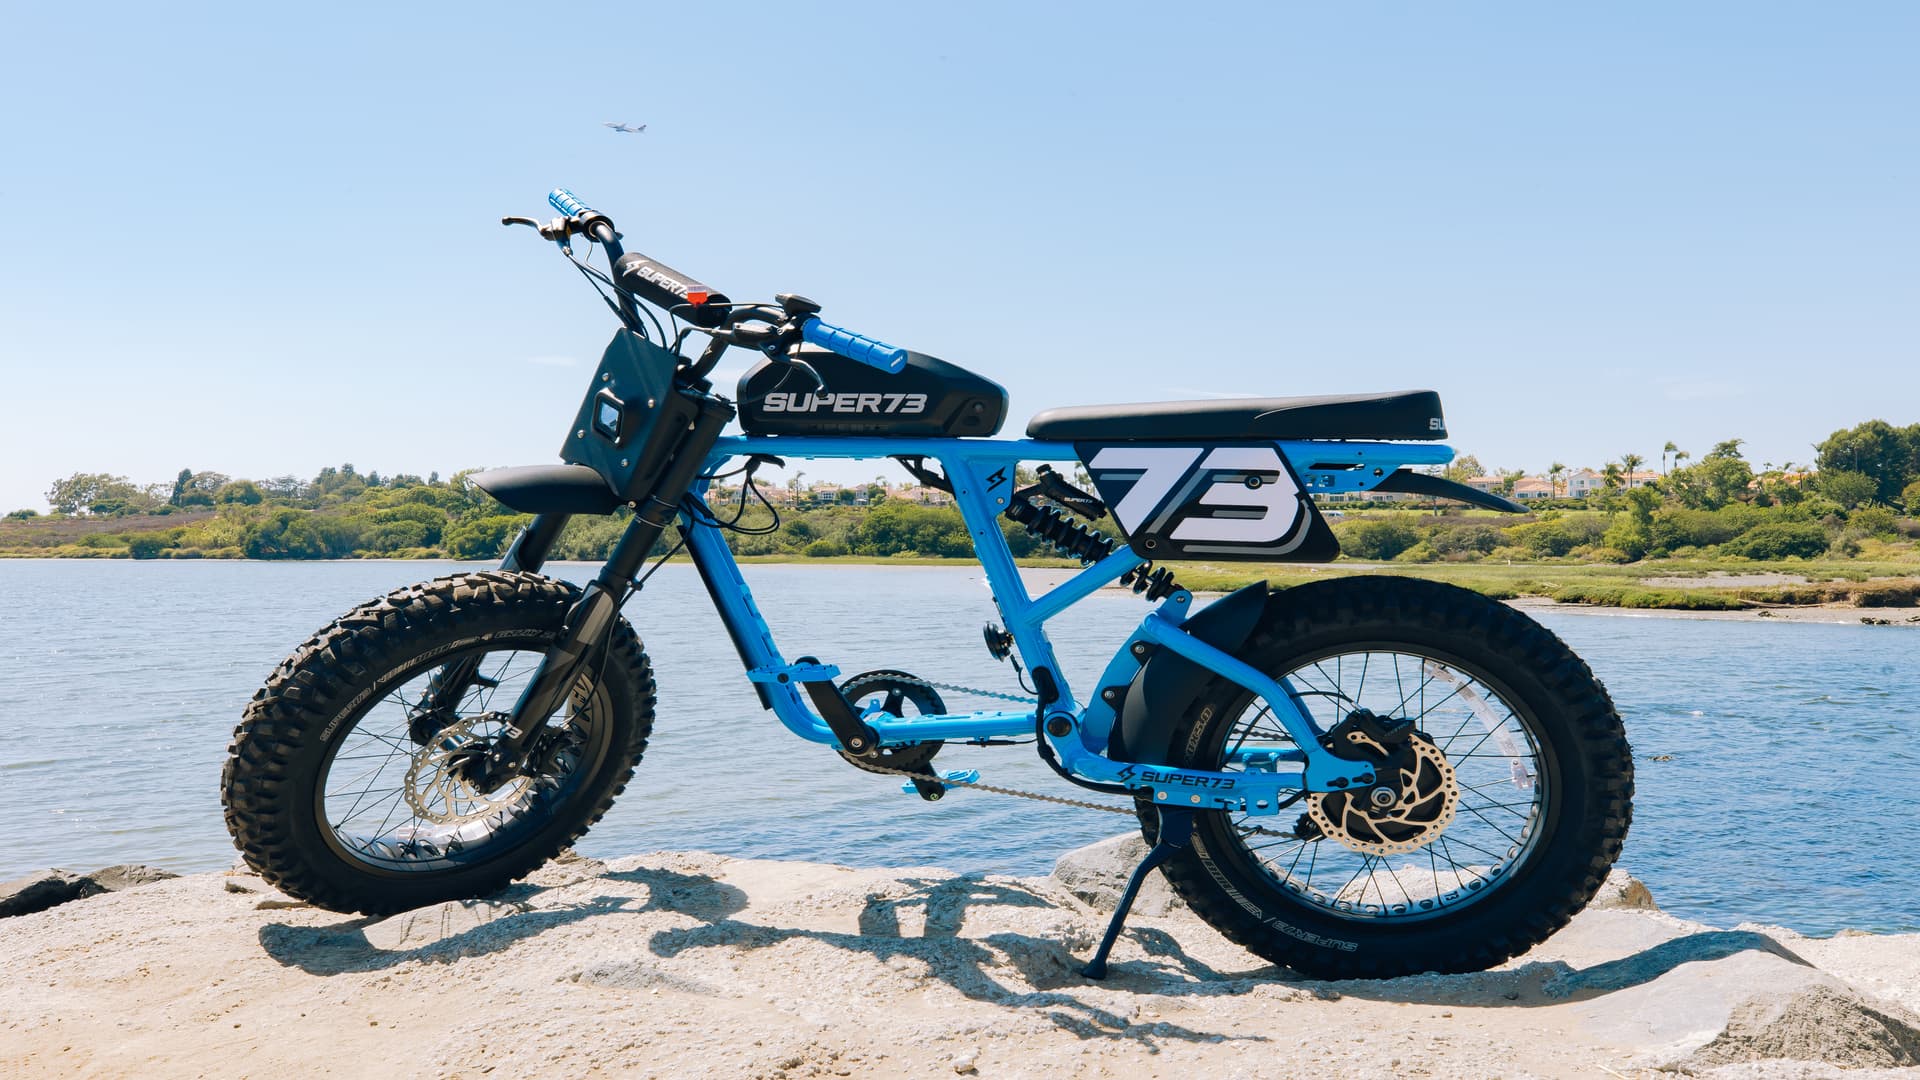 Super73-RX Blu Tang ebike on the shore of a lake